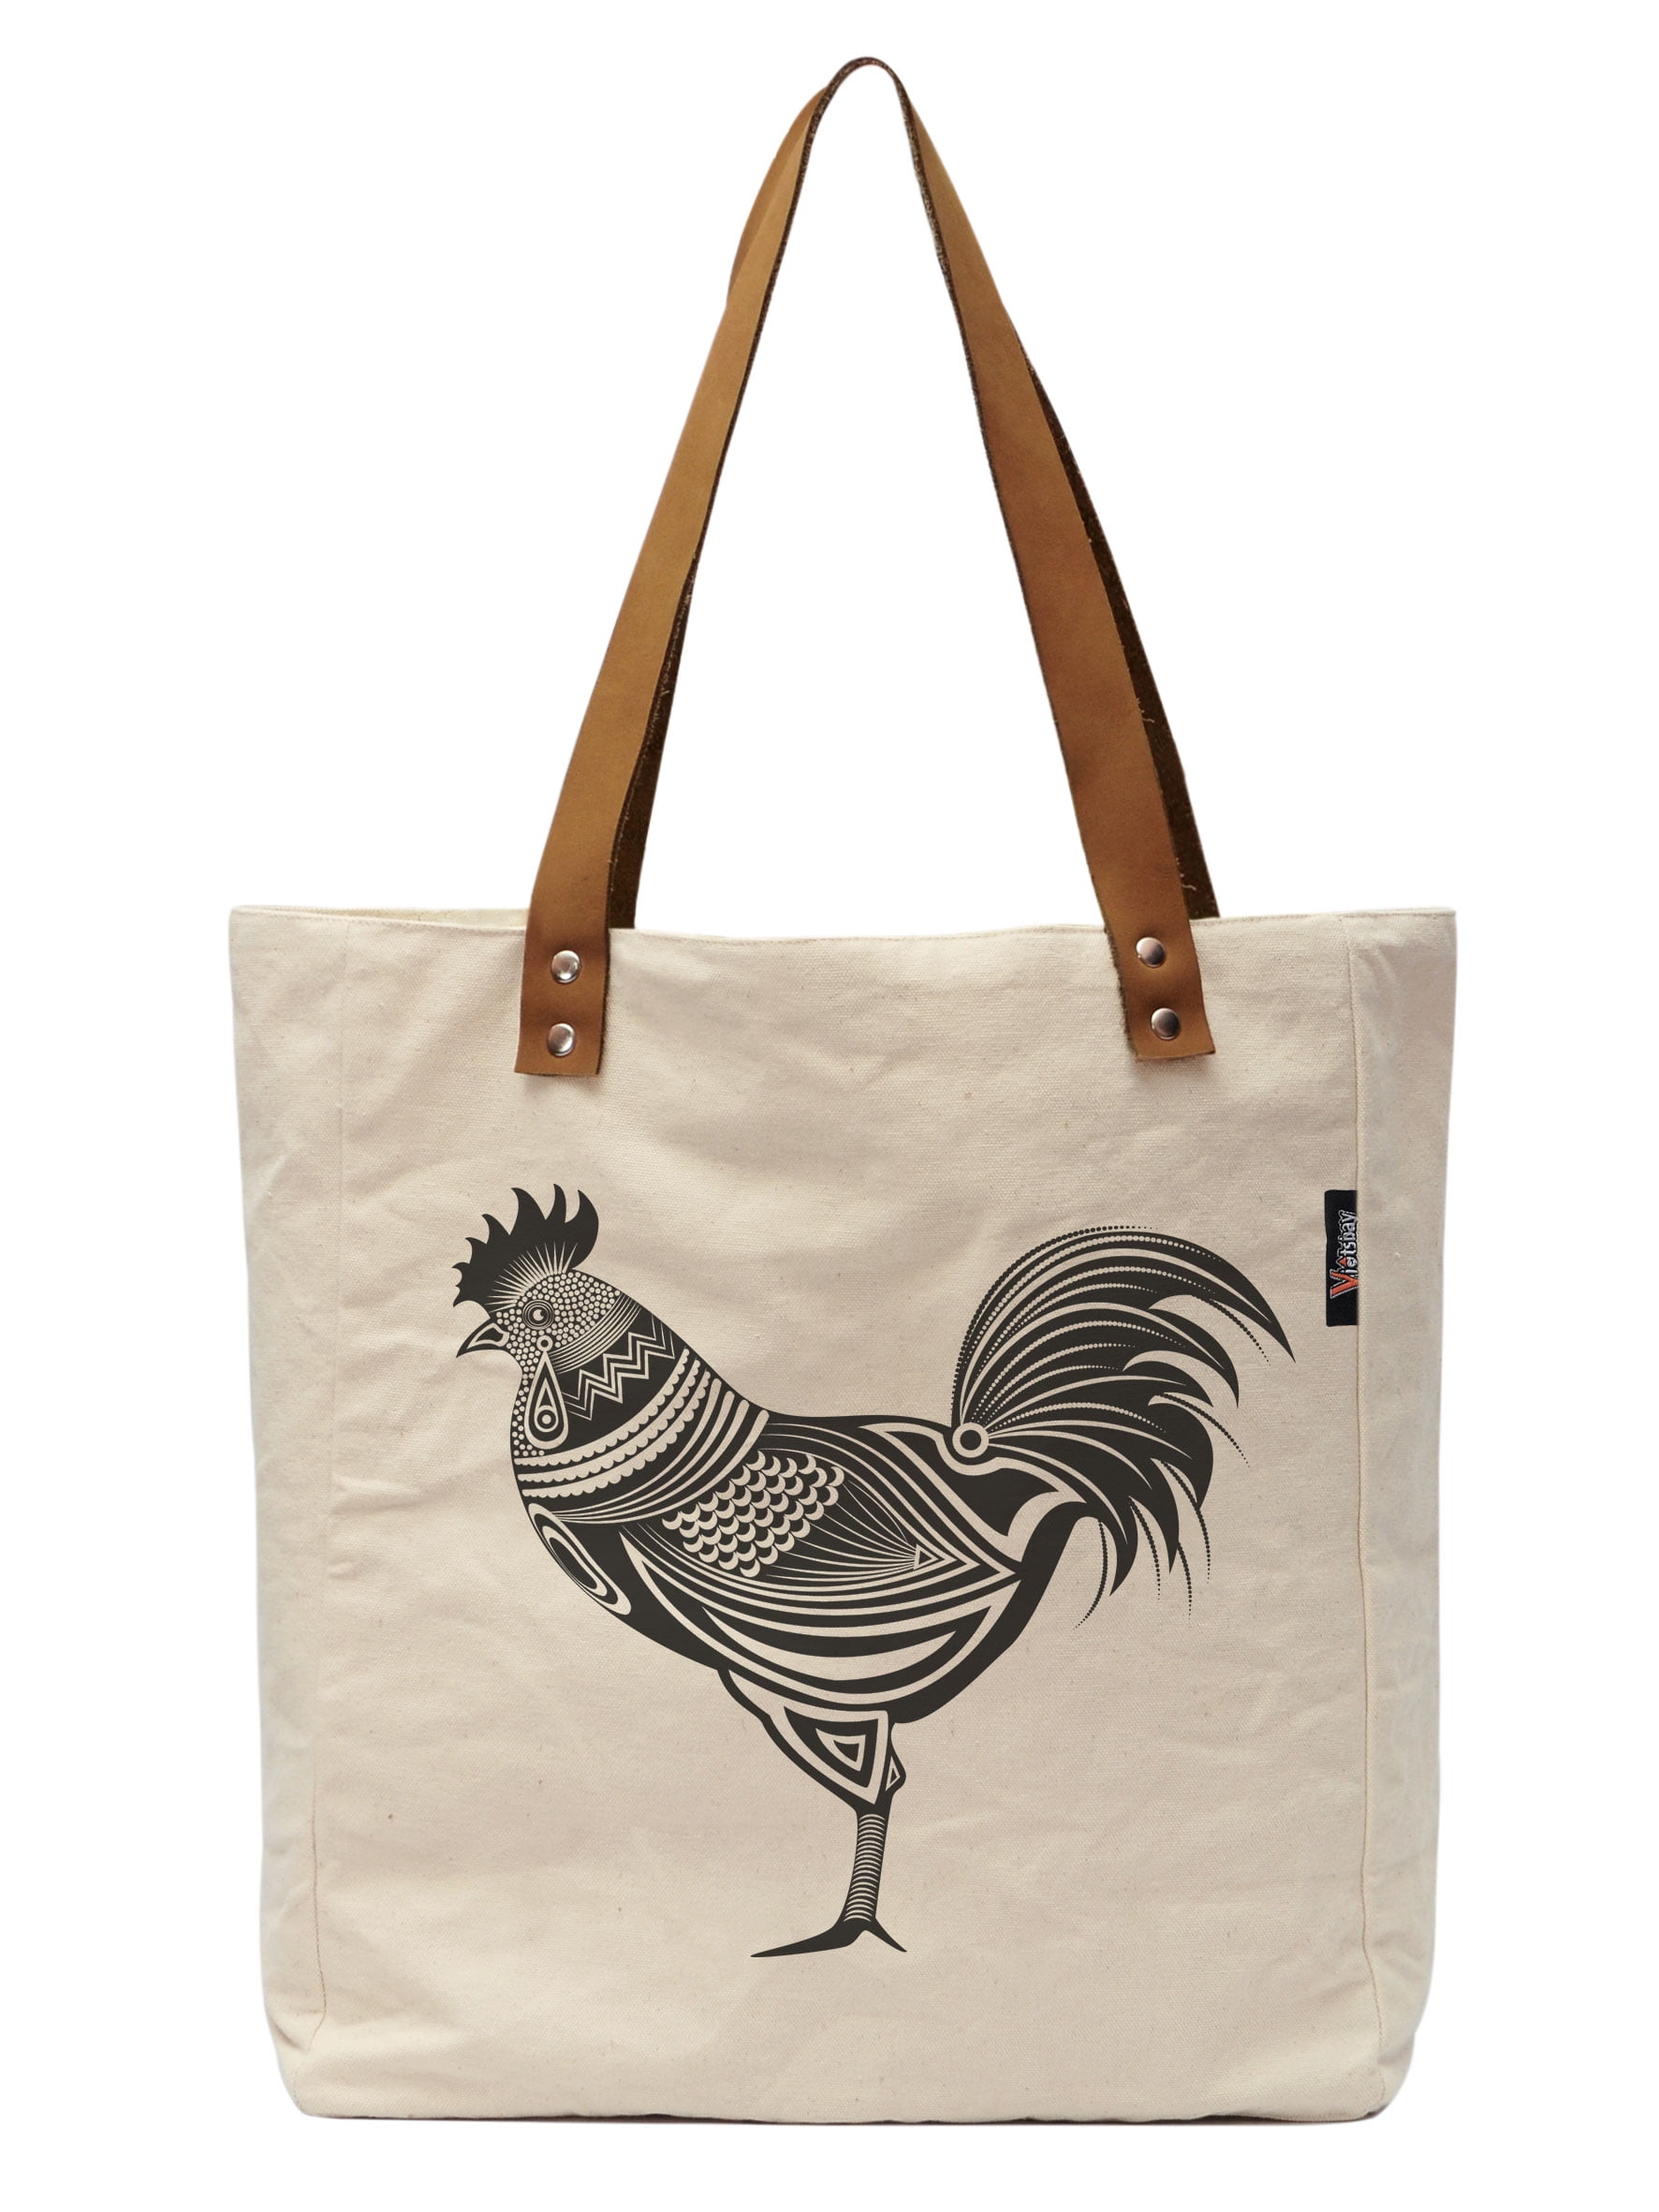 Womens Leather Tote Shoulder Bags Handbags with Blue Rooster Farm